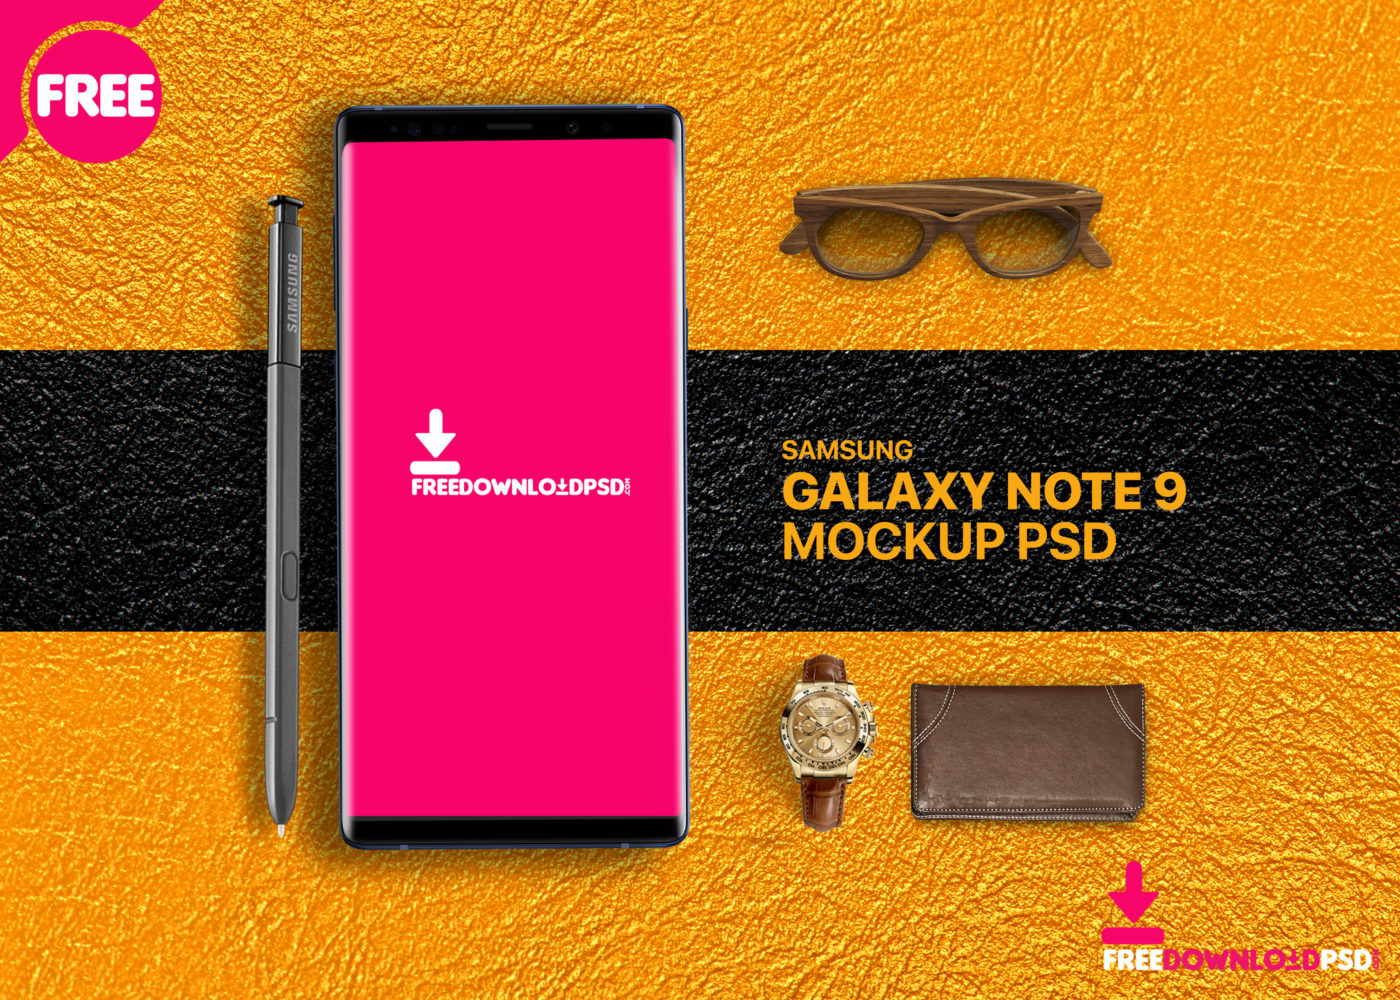 Download Samsung Galaxy Note 9 Mockup PSD | FreedownloadPSD.com